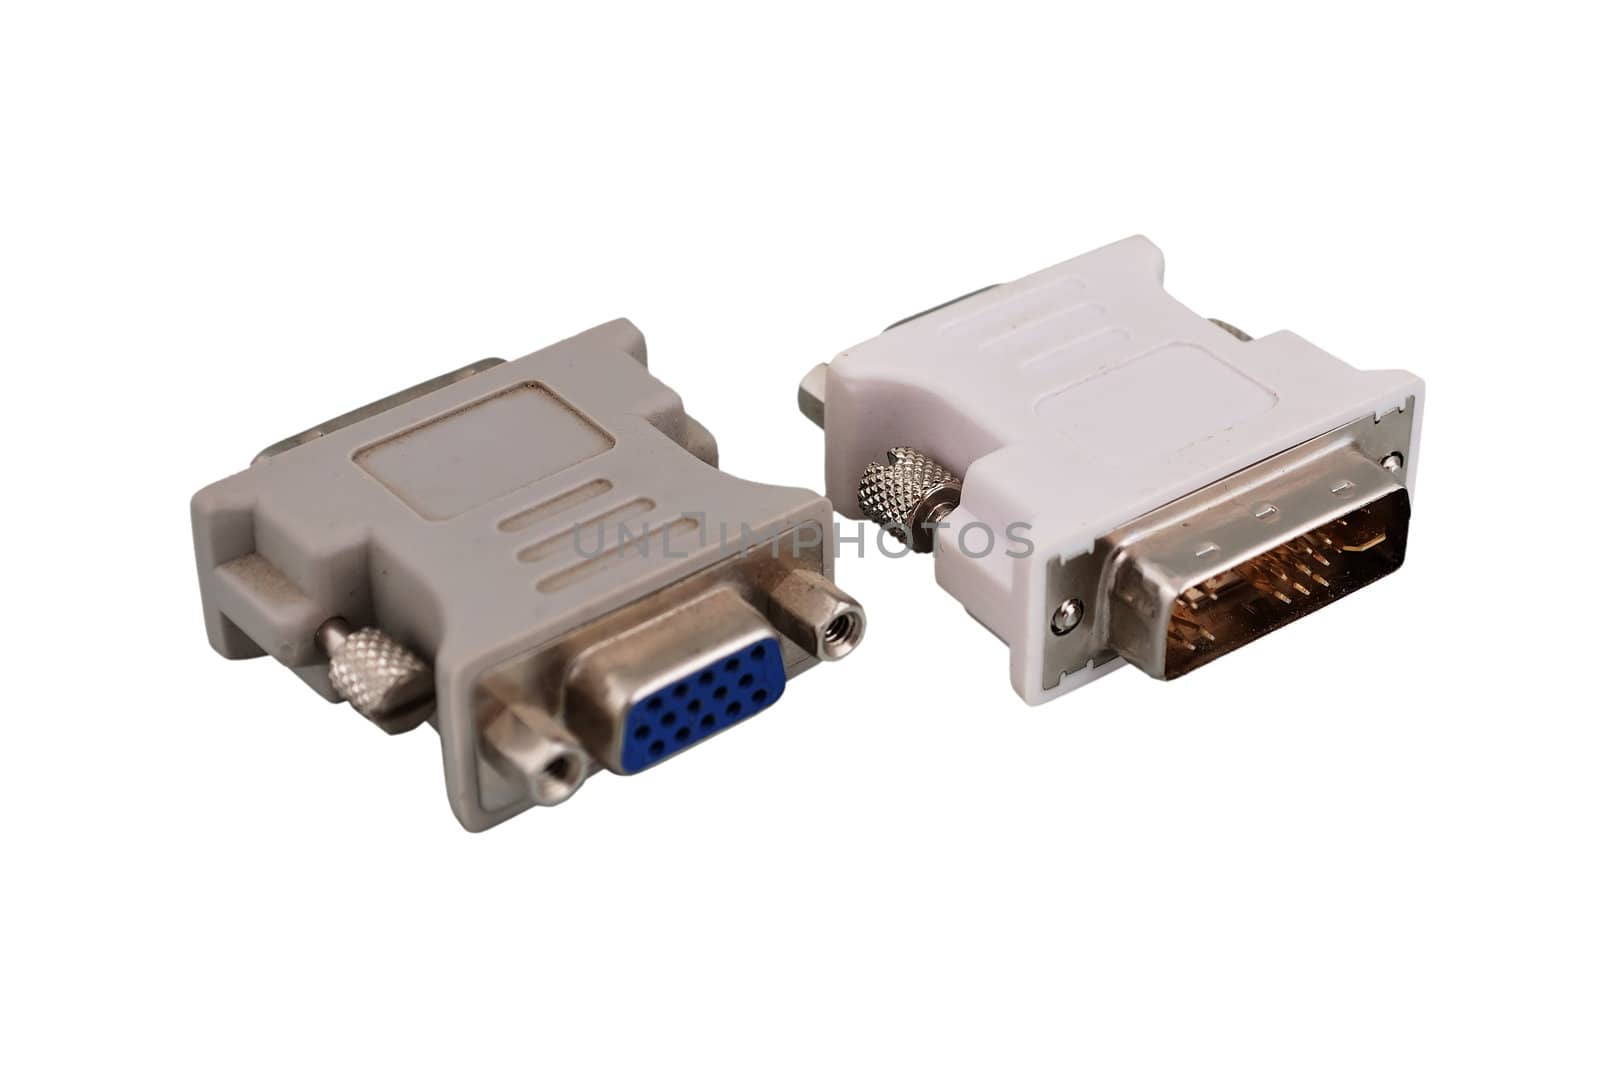 two vga adapters on a white background